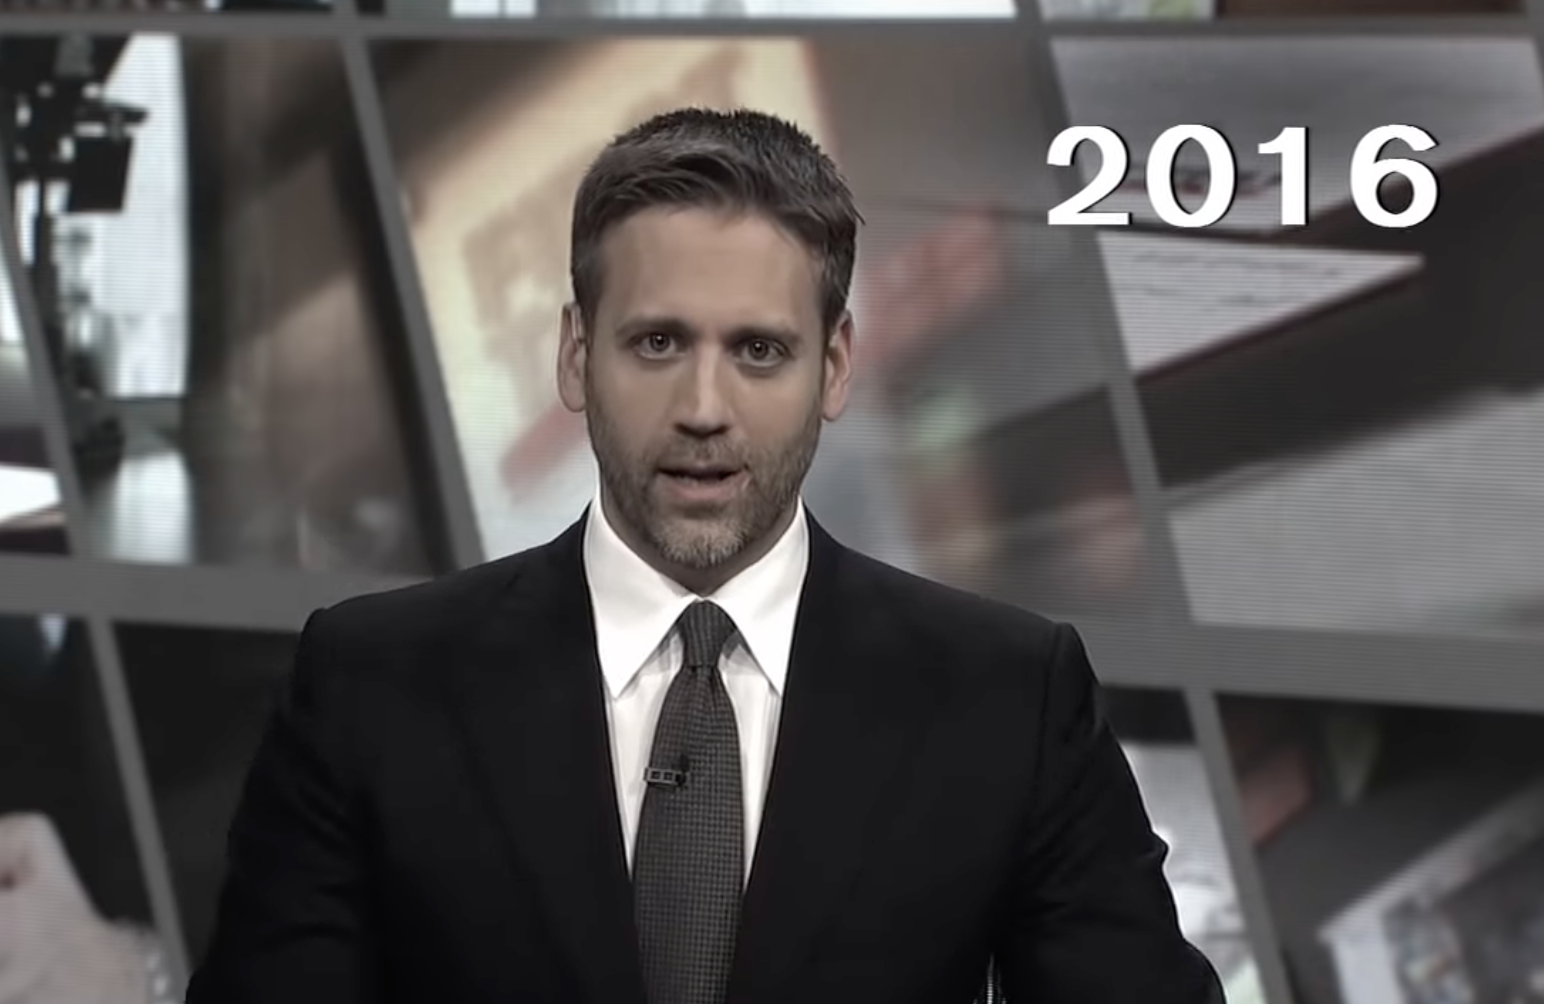 Max Kellerman Served Up A Self Roast Over His Awful 2016 'Cliff' Take On Tom Brady